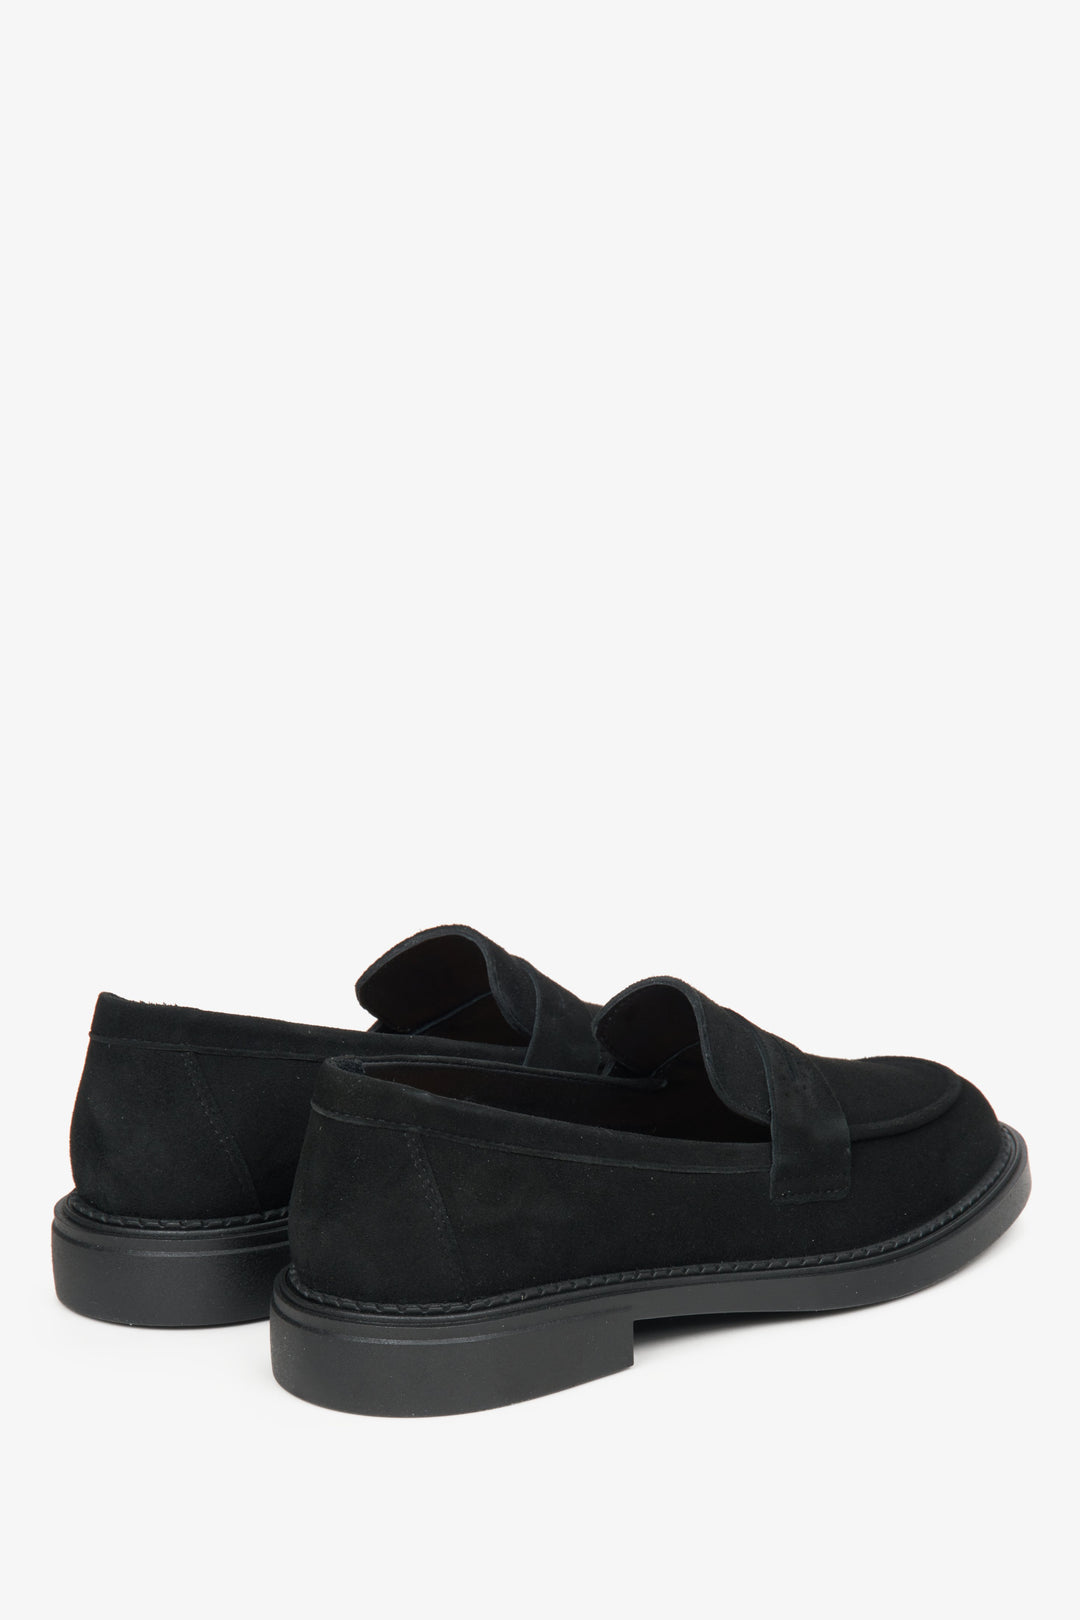 Women's velour moccasins in black Estro - a close-up of the heel.